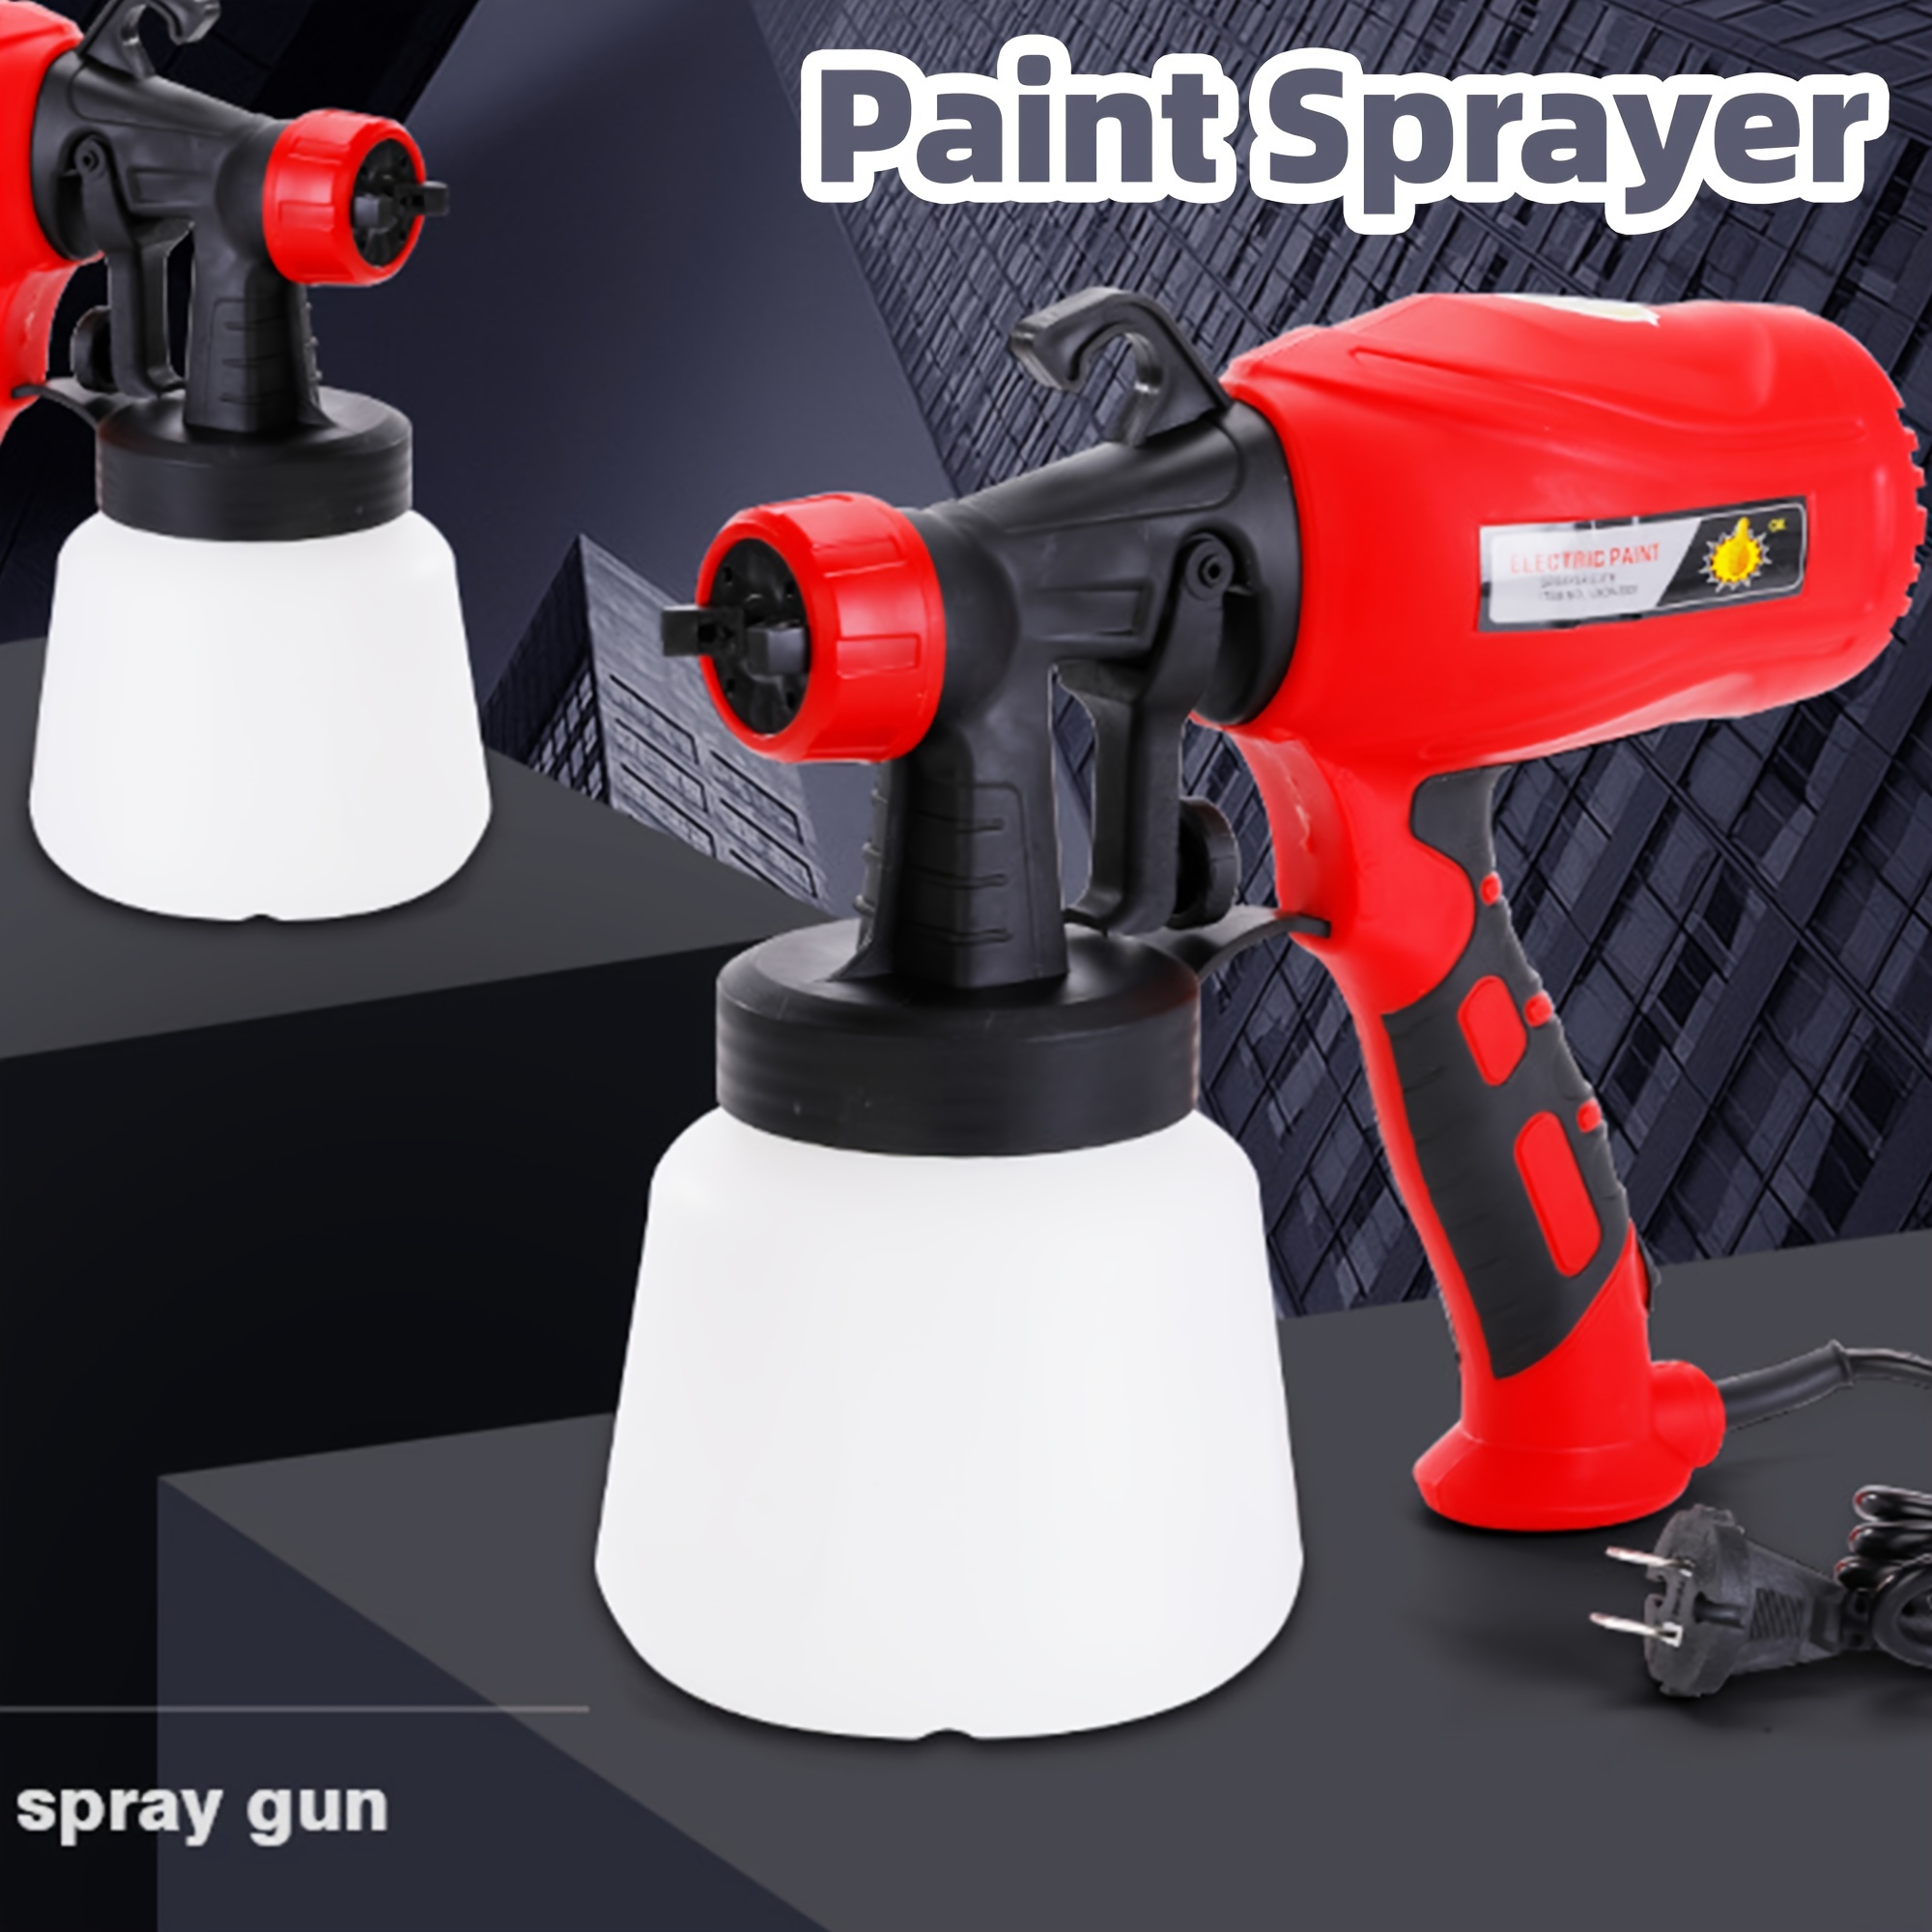 HVLP Mini Spray Gun Air Paint Sprayer,Gravity Feed Touch Up Air Spray Gun  with 1.0mm Nozzle,125cc Cup for Automotive,House Painting and Furniture